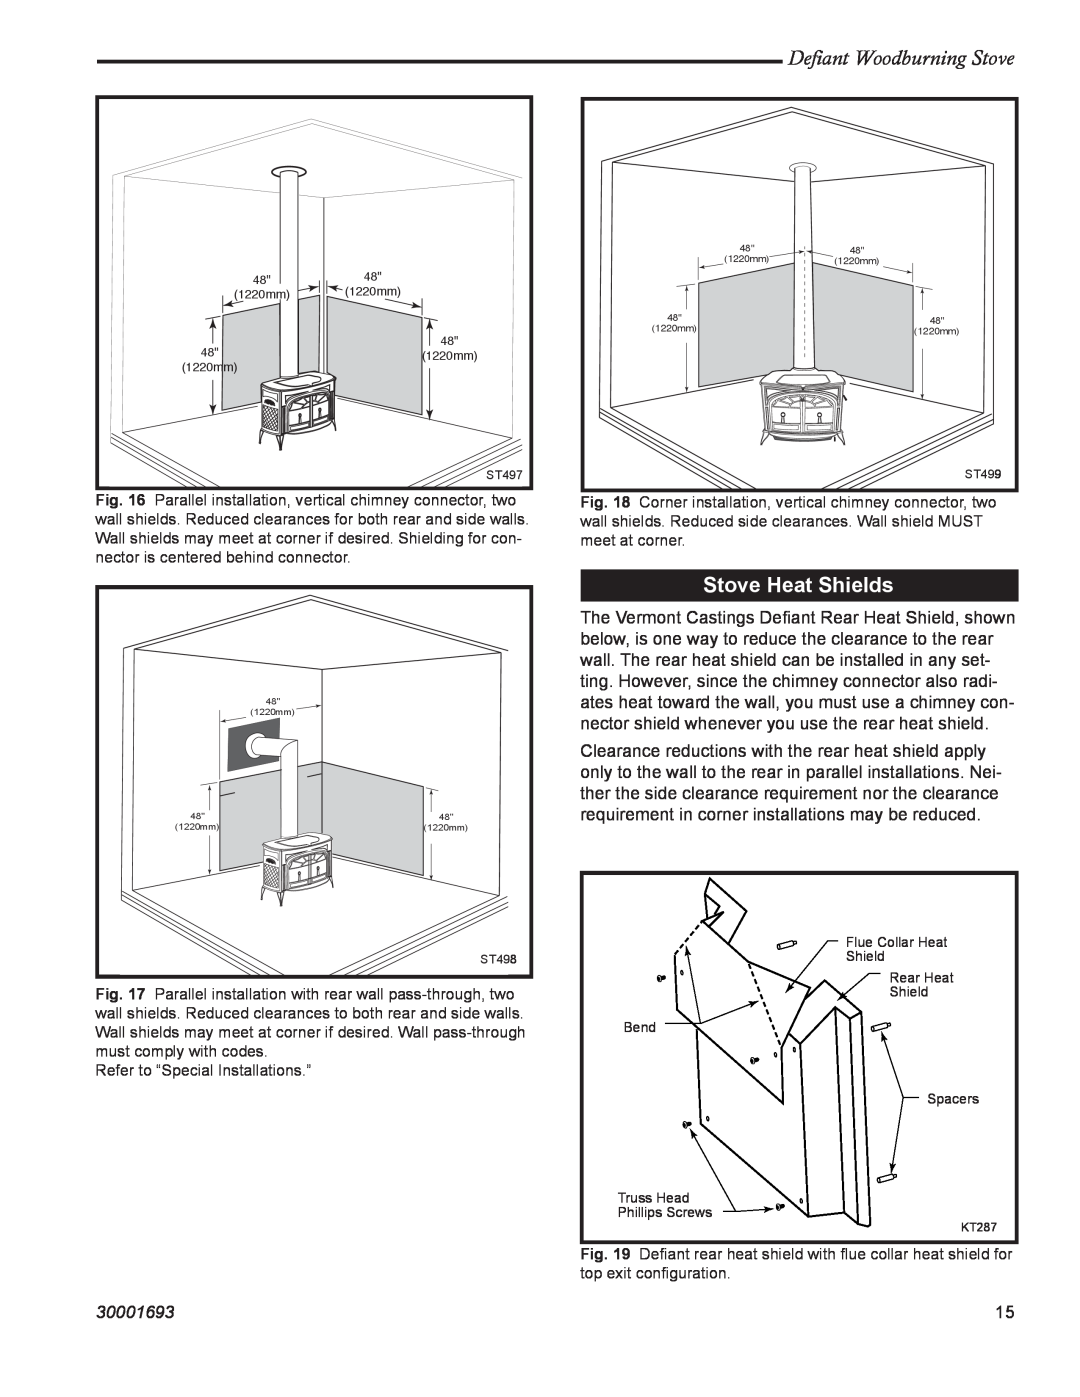 Vermont Casting 1945 installation instructions Stove Heat Shields, Defiant Woodburning Stove, 30001693 